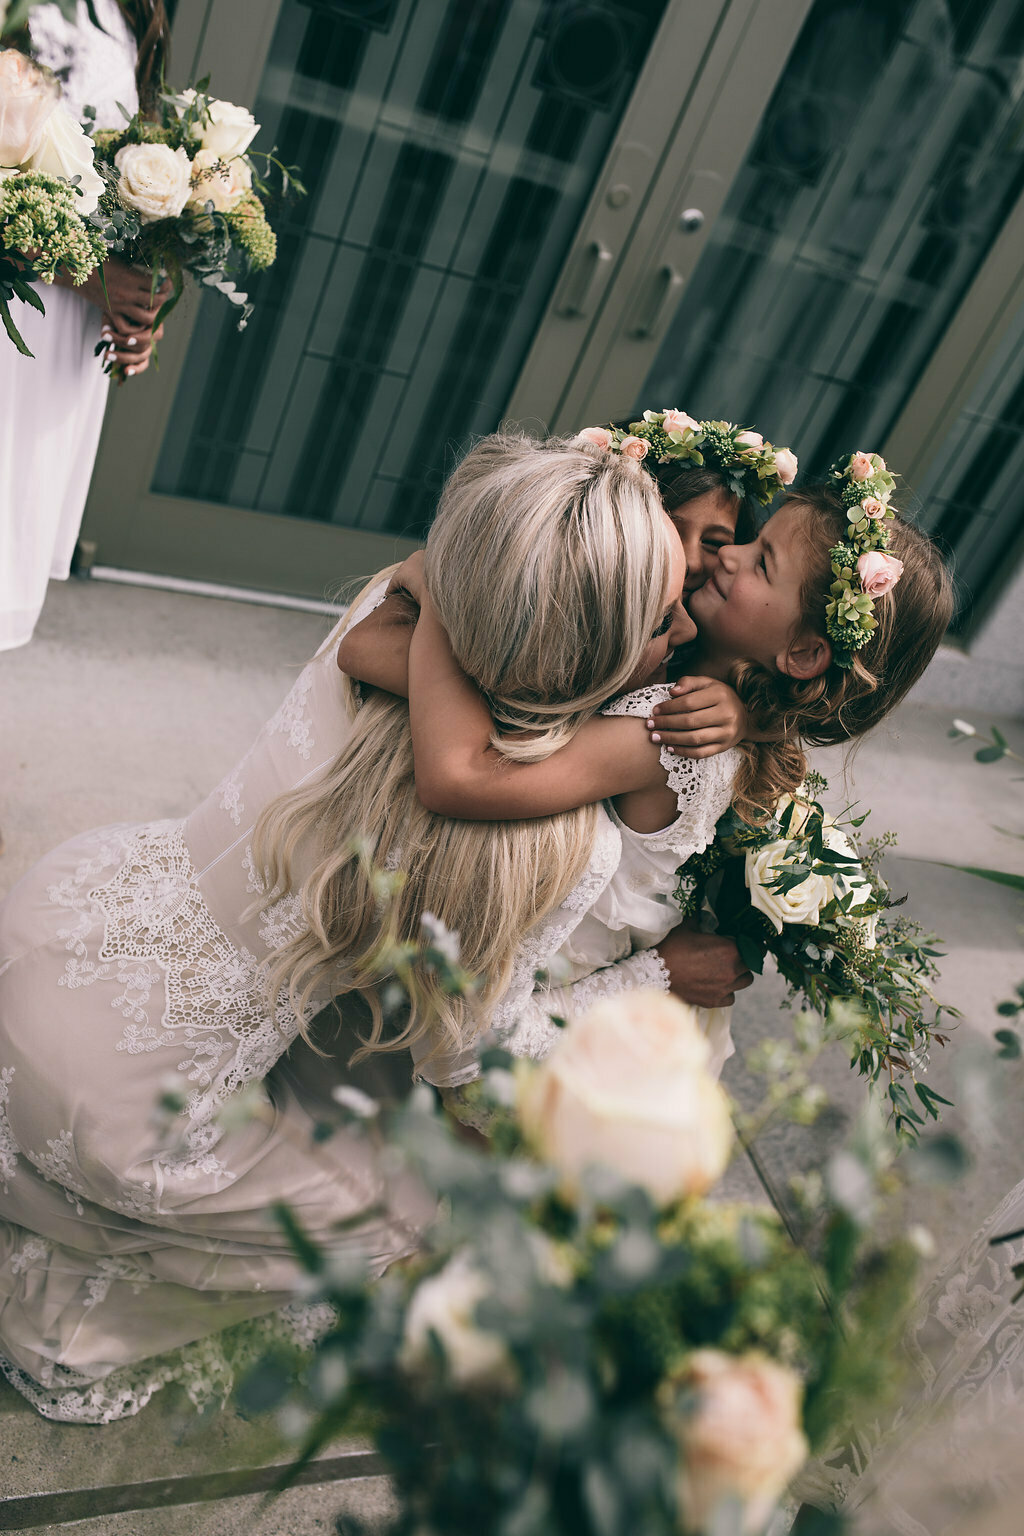 bride-lizzy-sharing-a-hug-with-her-bohemian-flower-girls-wearing-boho-white-and-green-simple-flower-crowns